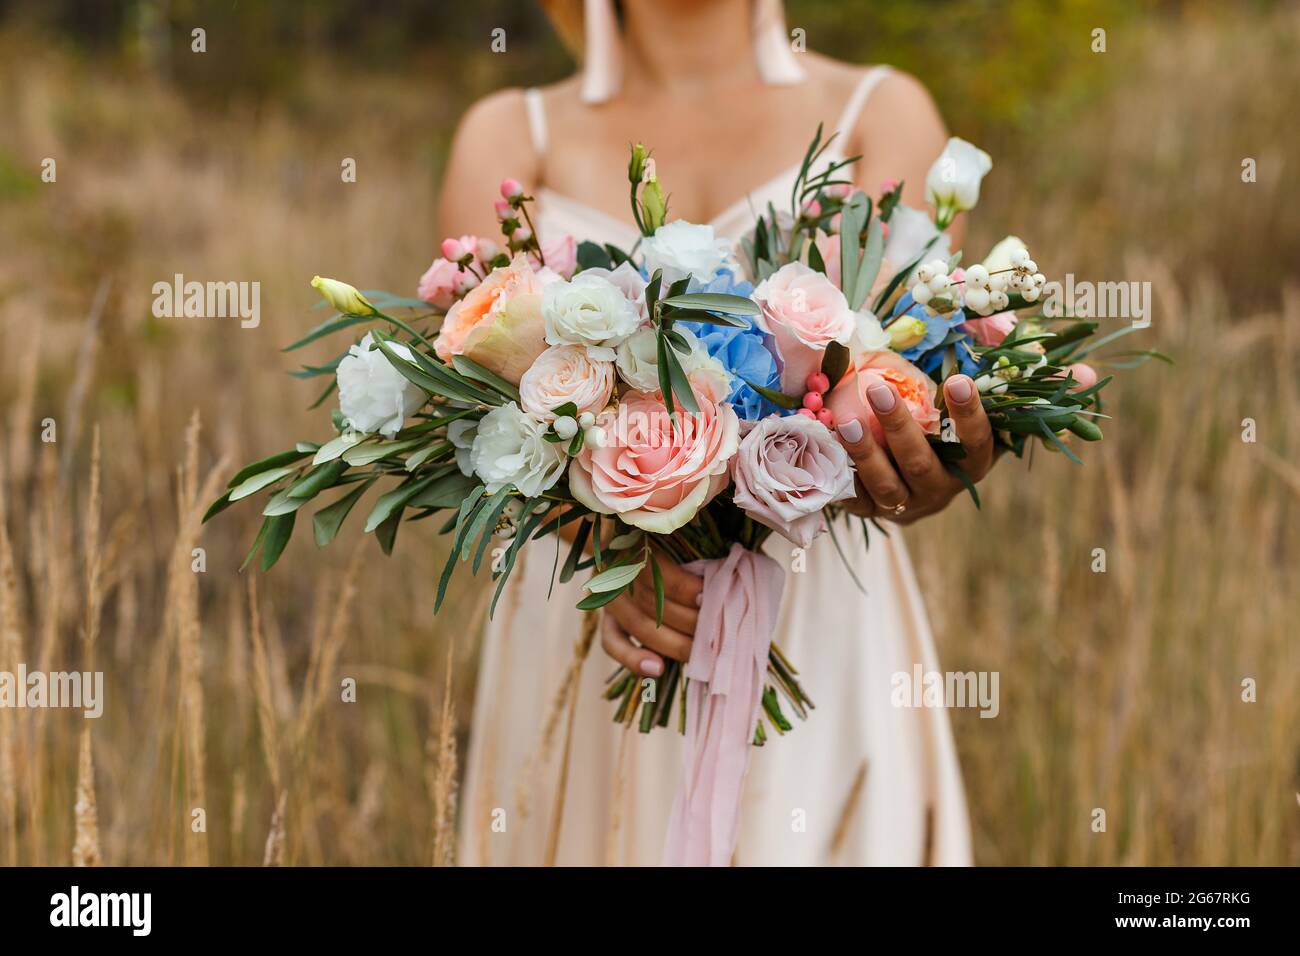 A delicate and very beautiful wedding bouquet of roses, greenery, eustoma and hydrangea in brides hands. Bridal trendy florists in pastel colors. Hand Stock Photo